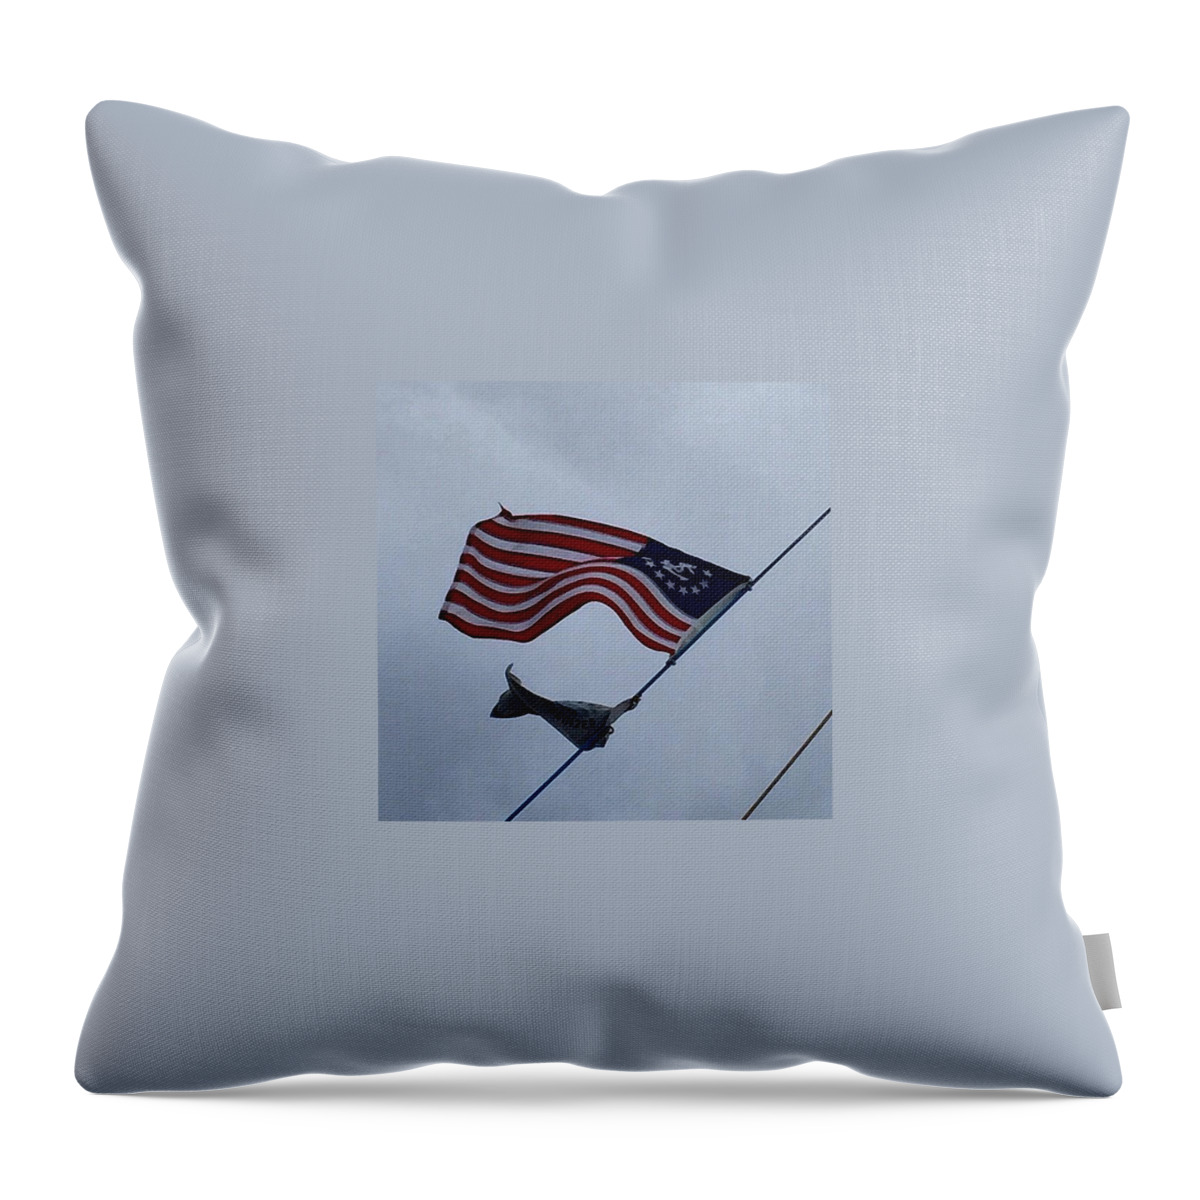 Colors Throw Pillow featuring the photograph #hoisting The #colors! by Darice Machel McGuire